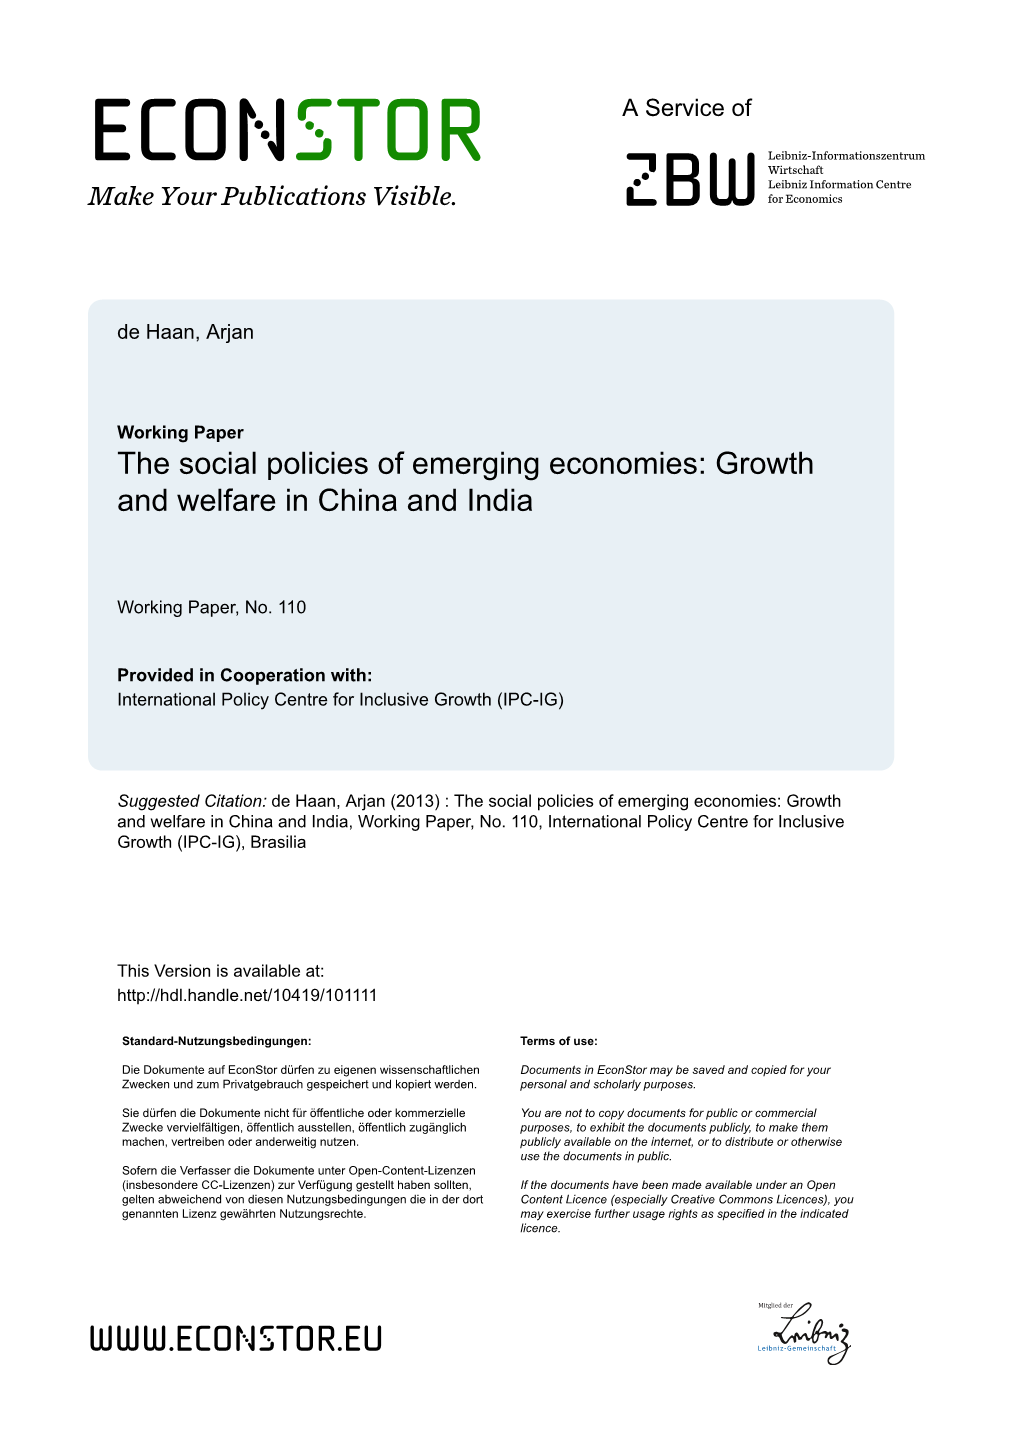 Growth and Welfare in China and India